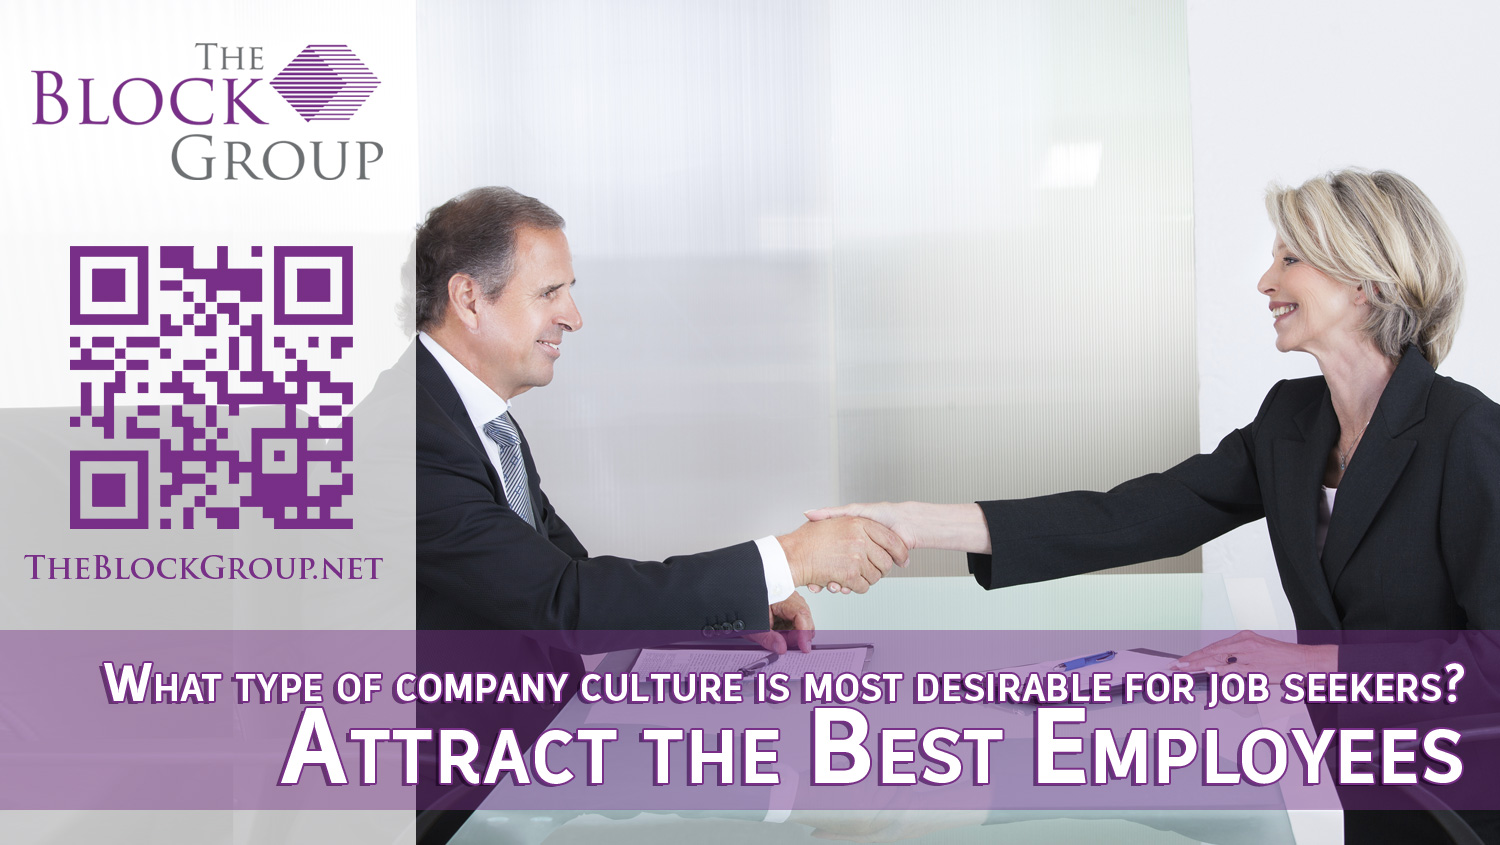 02-Attract-the-Best-Employees